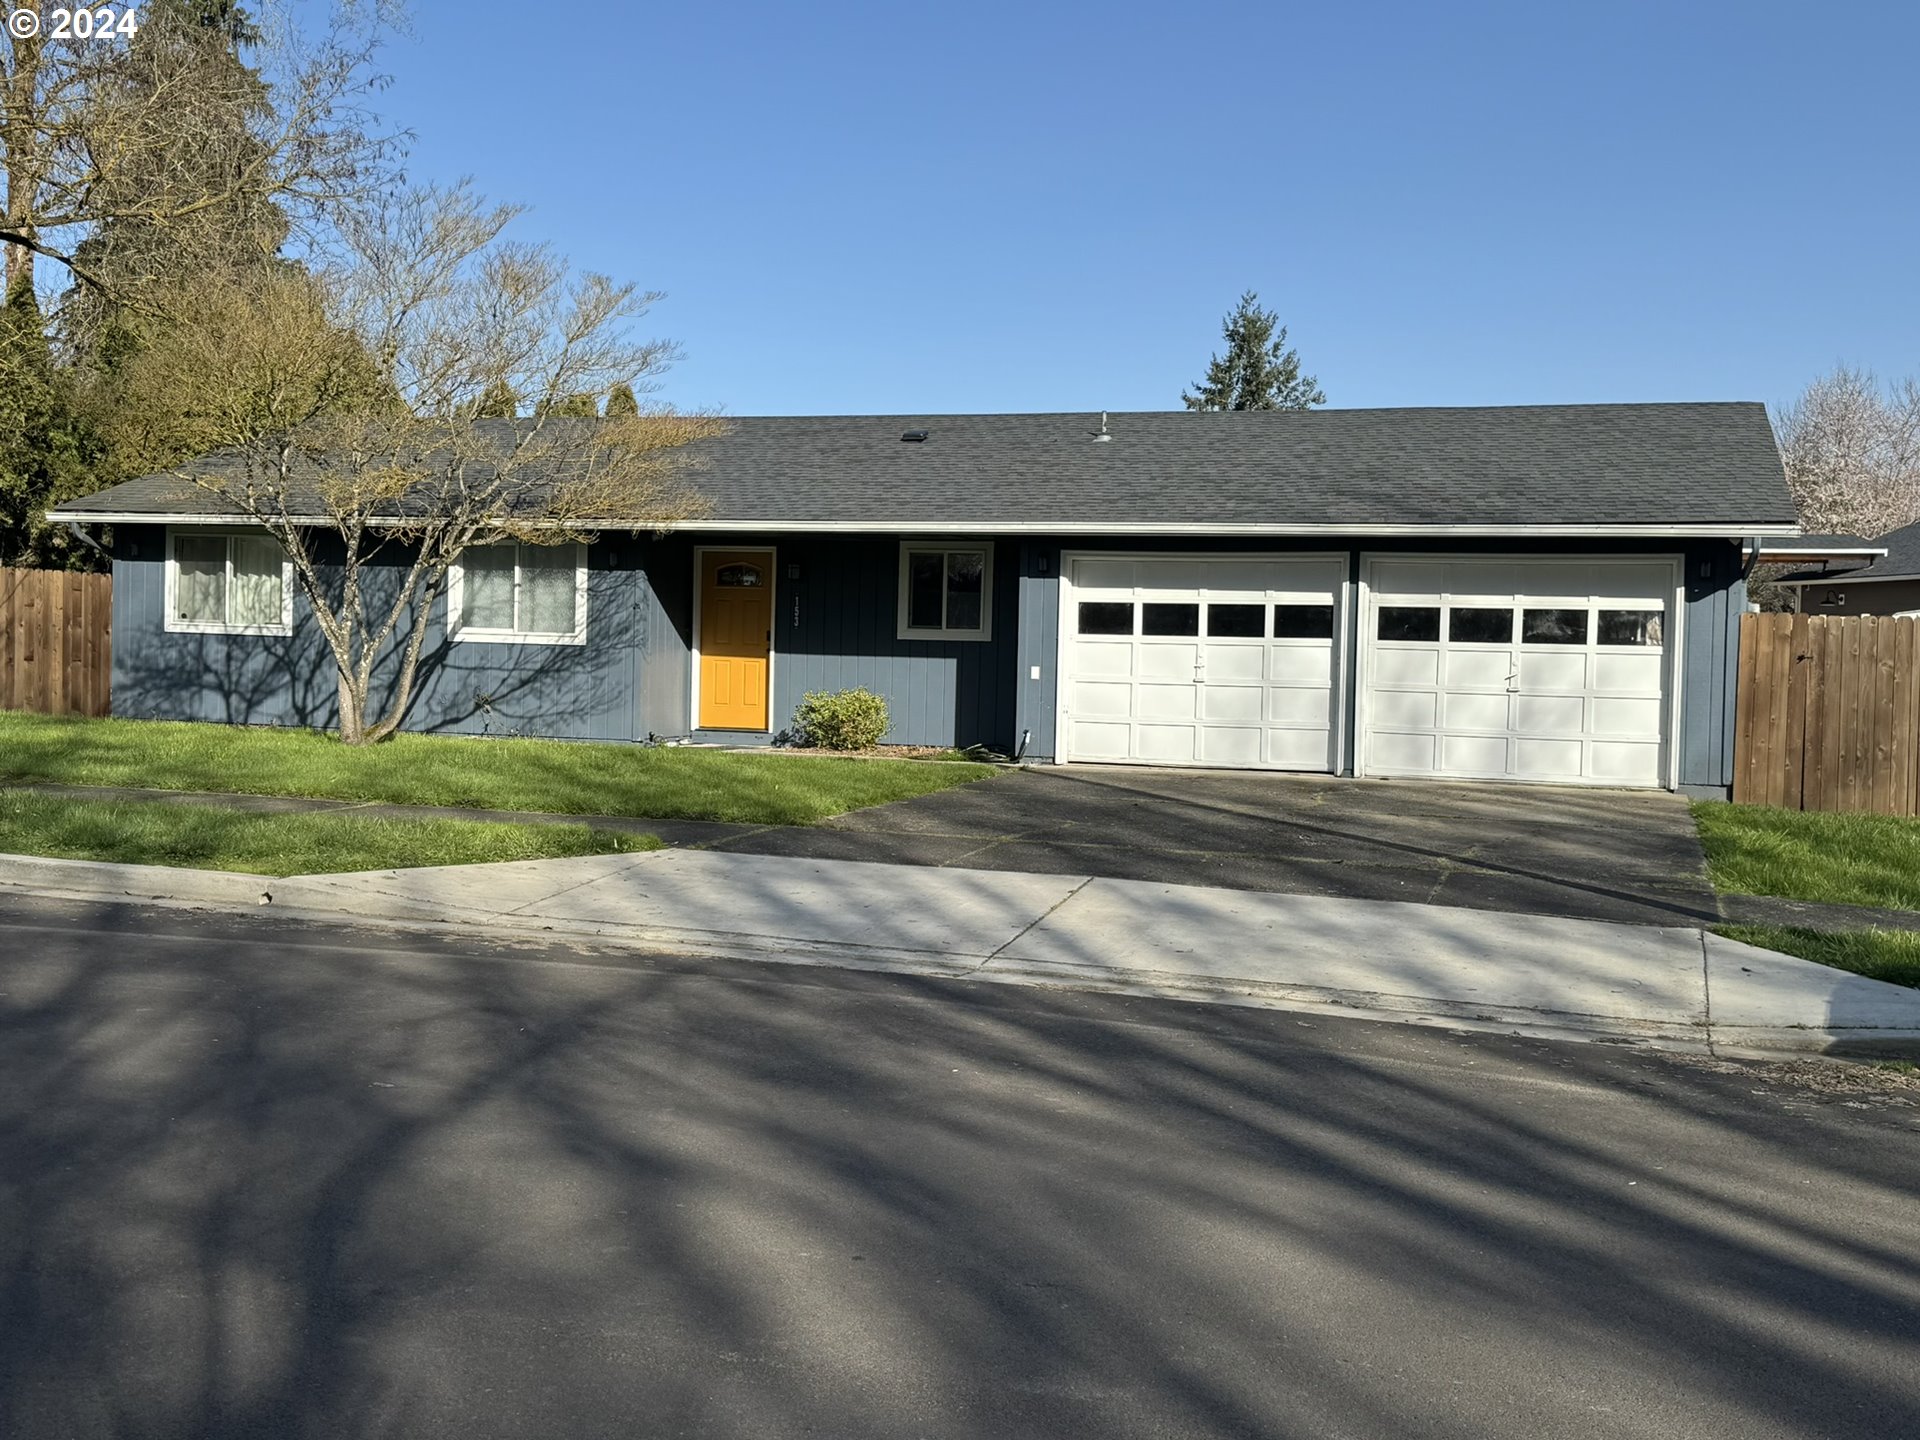 153 S 5TH ST, Jefferson, OR 97352